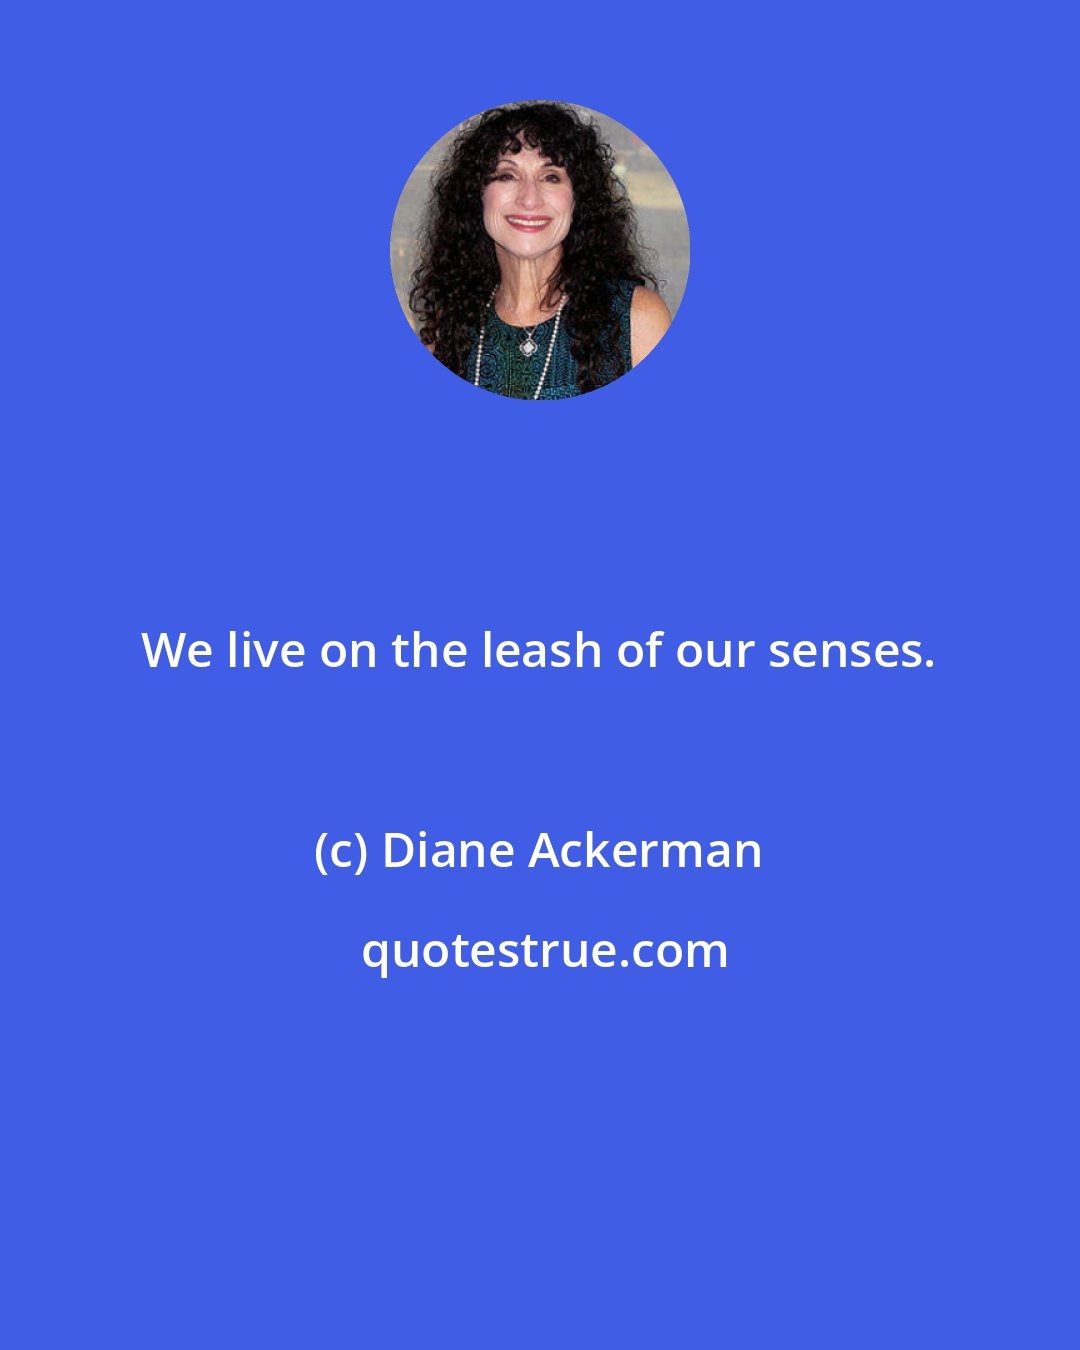 Diane Ackerman: We live on the leash of our senses.